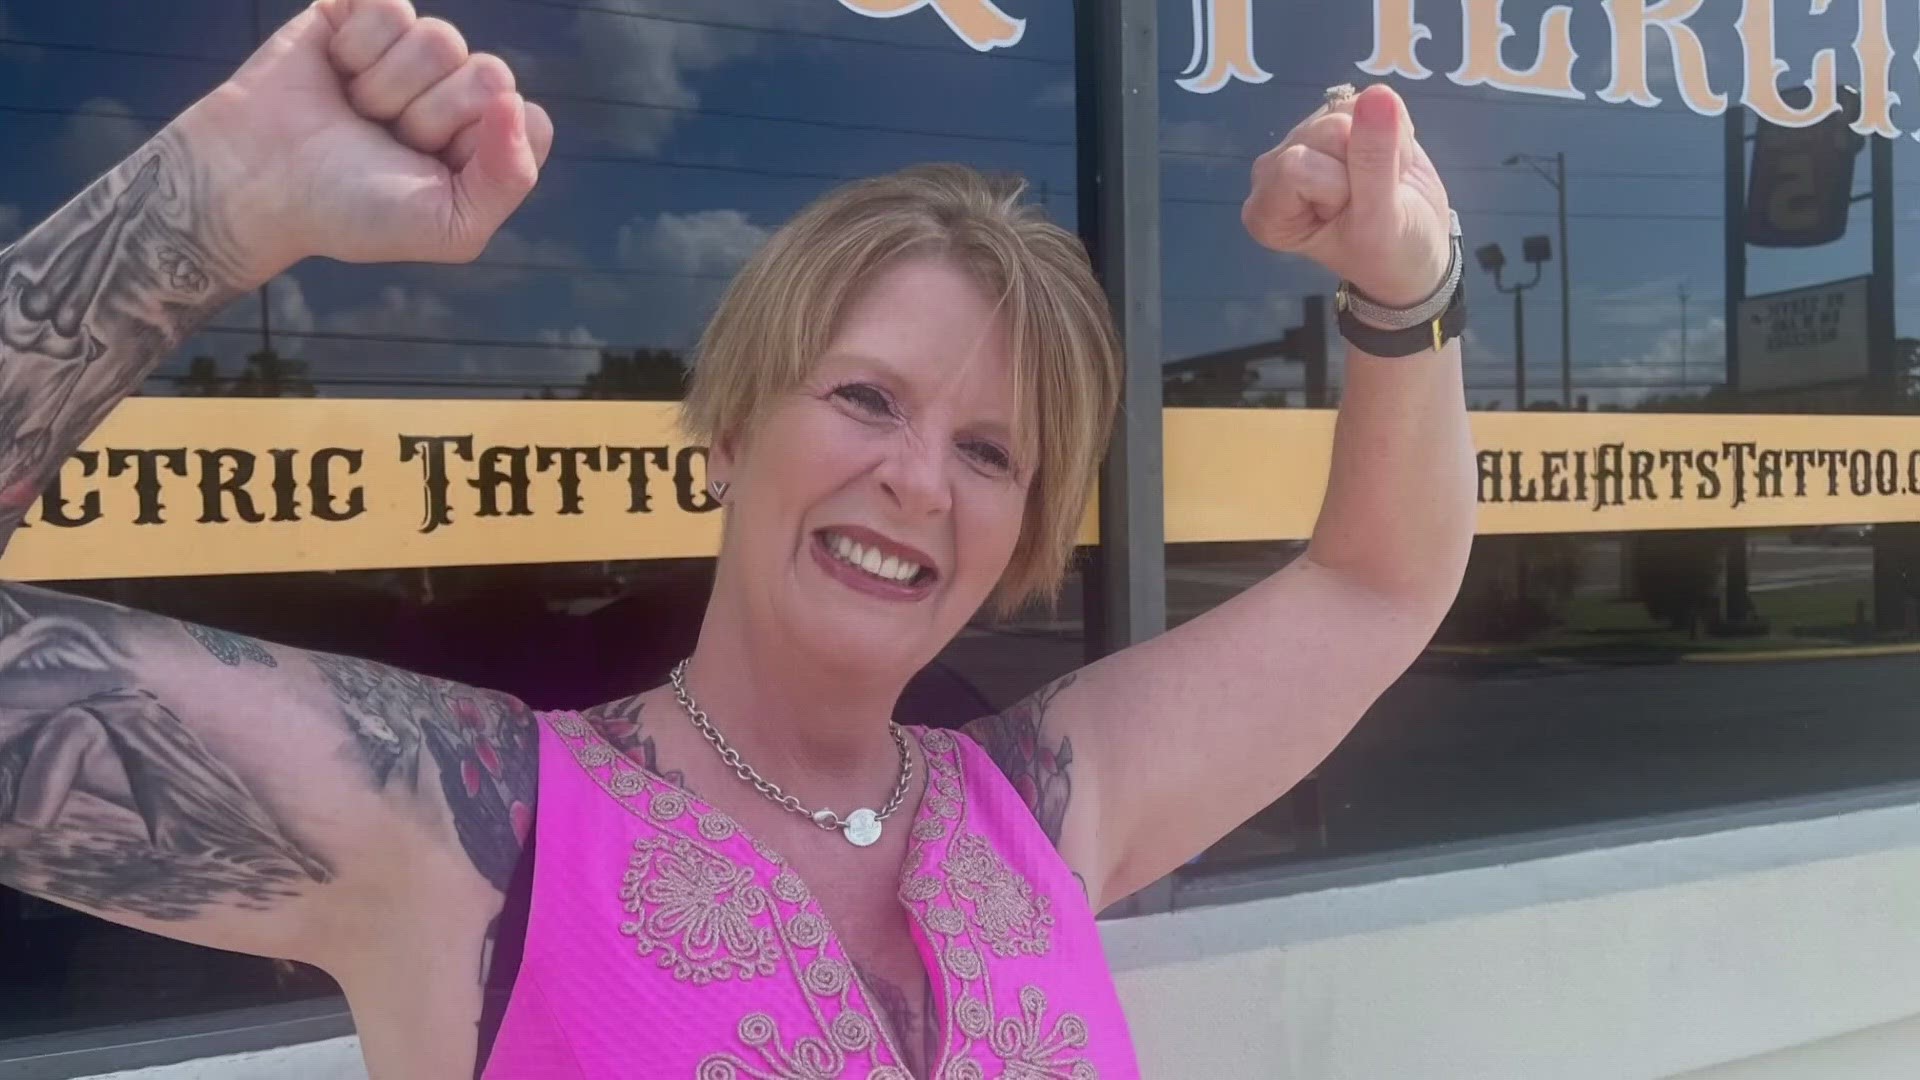 With tattoos, breast cancer fighters choose to tell their stories